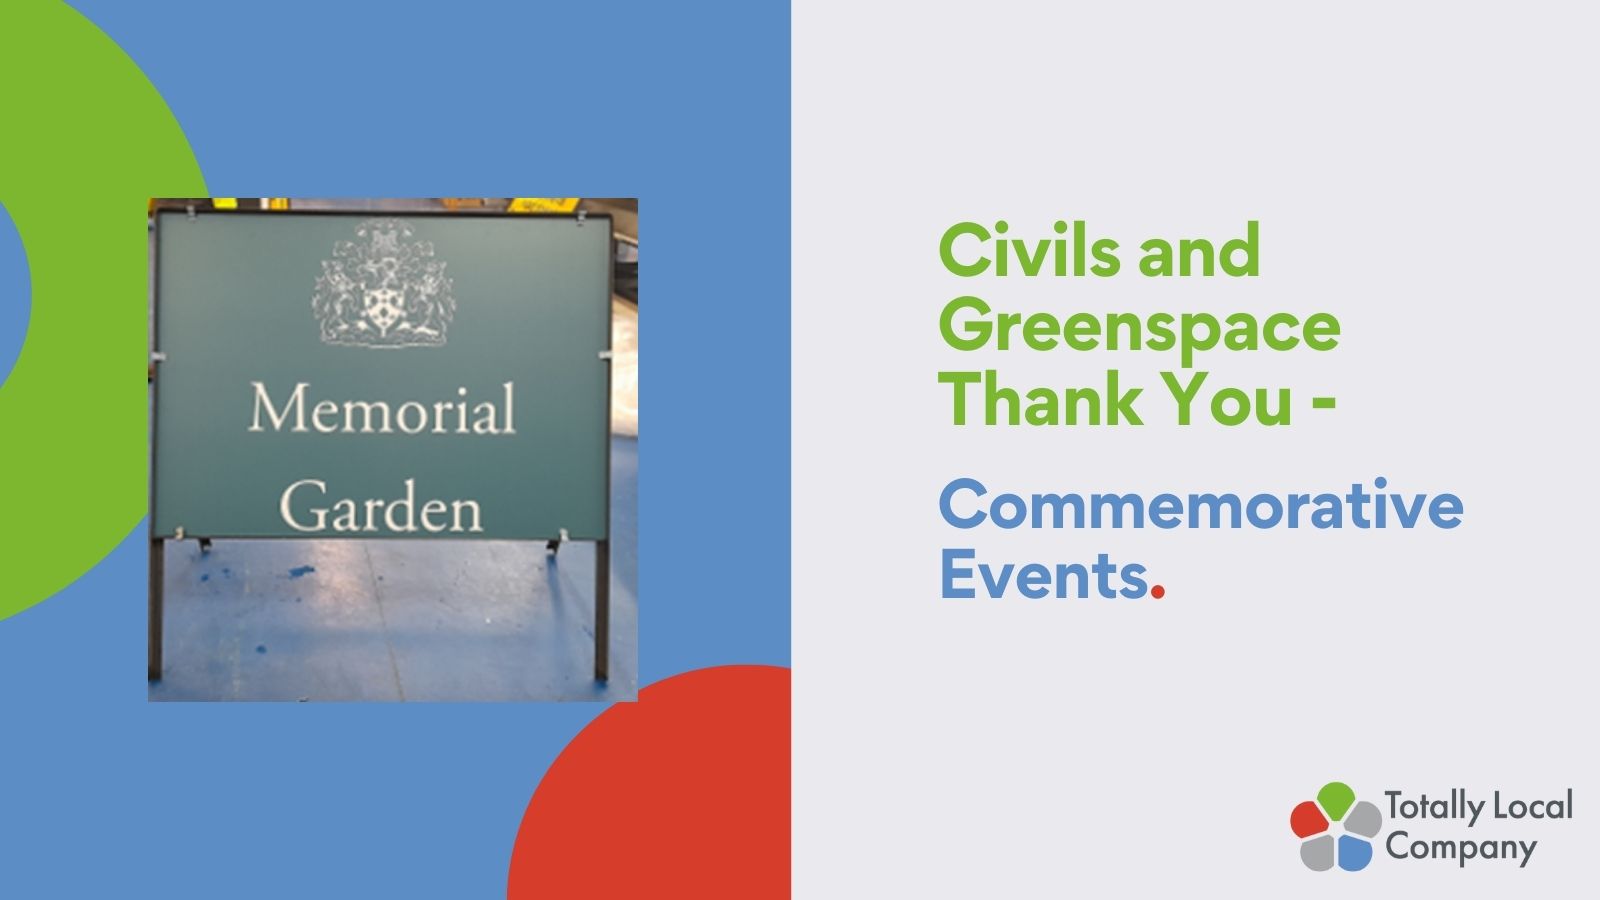 Commemorative Events – thank you